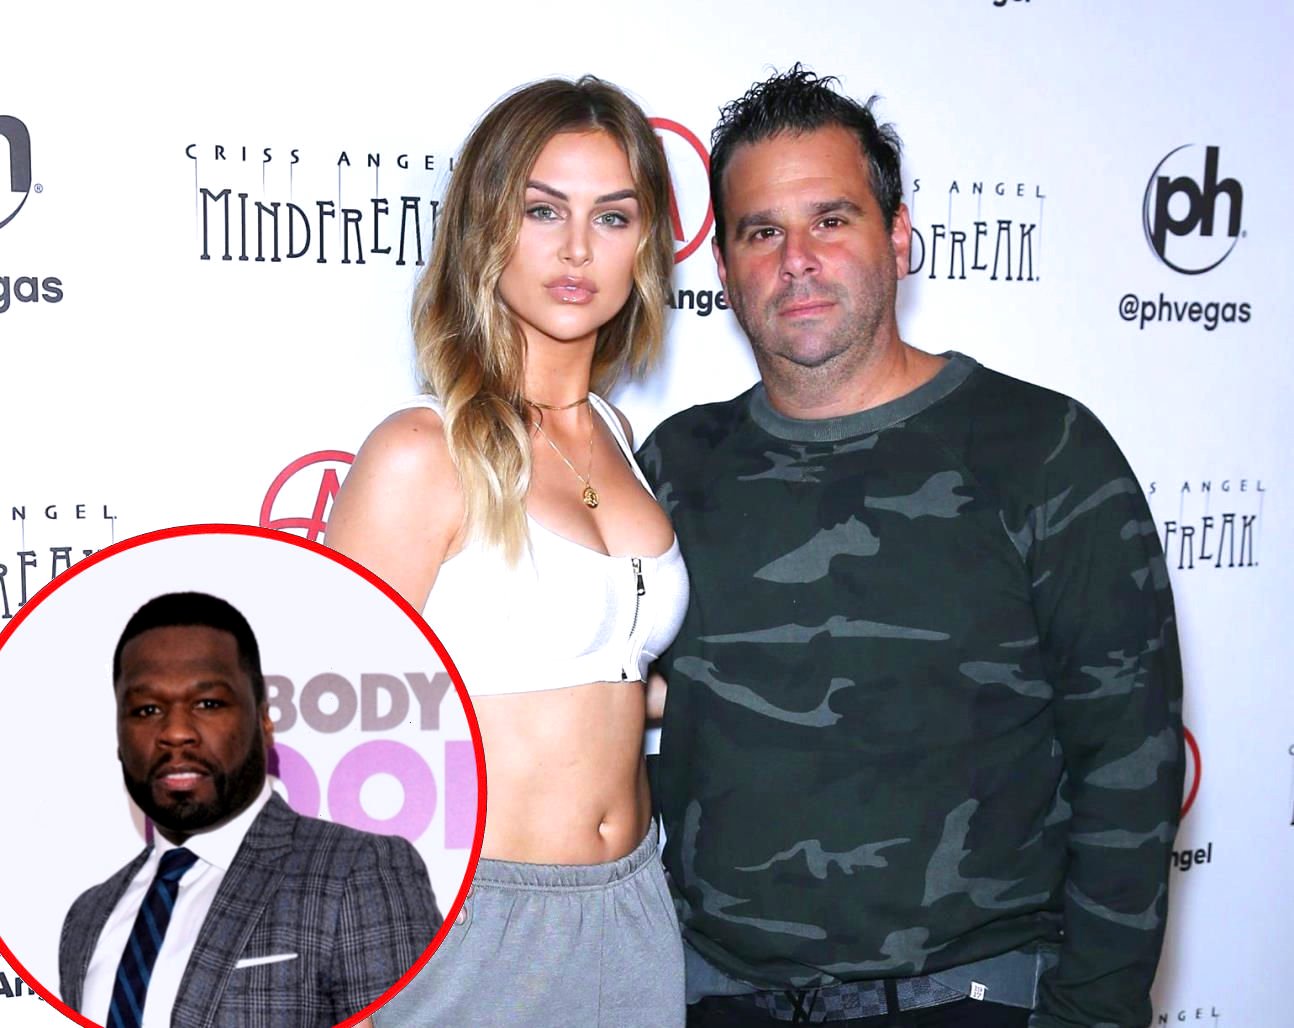 Vanderpump Rules Star Lala Kent Deletes Photos of Fiance Randall Emmett from Instagram, Reacts to Feud With 50 Cent